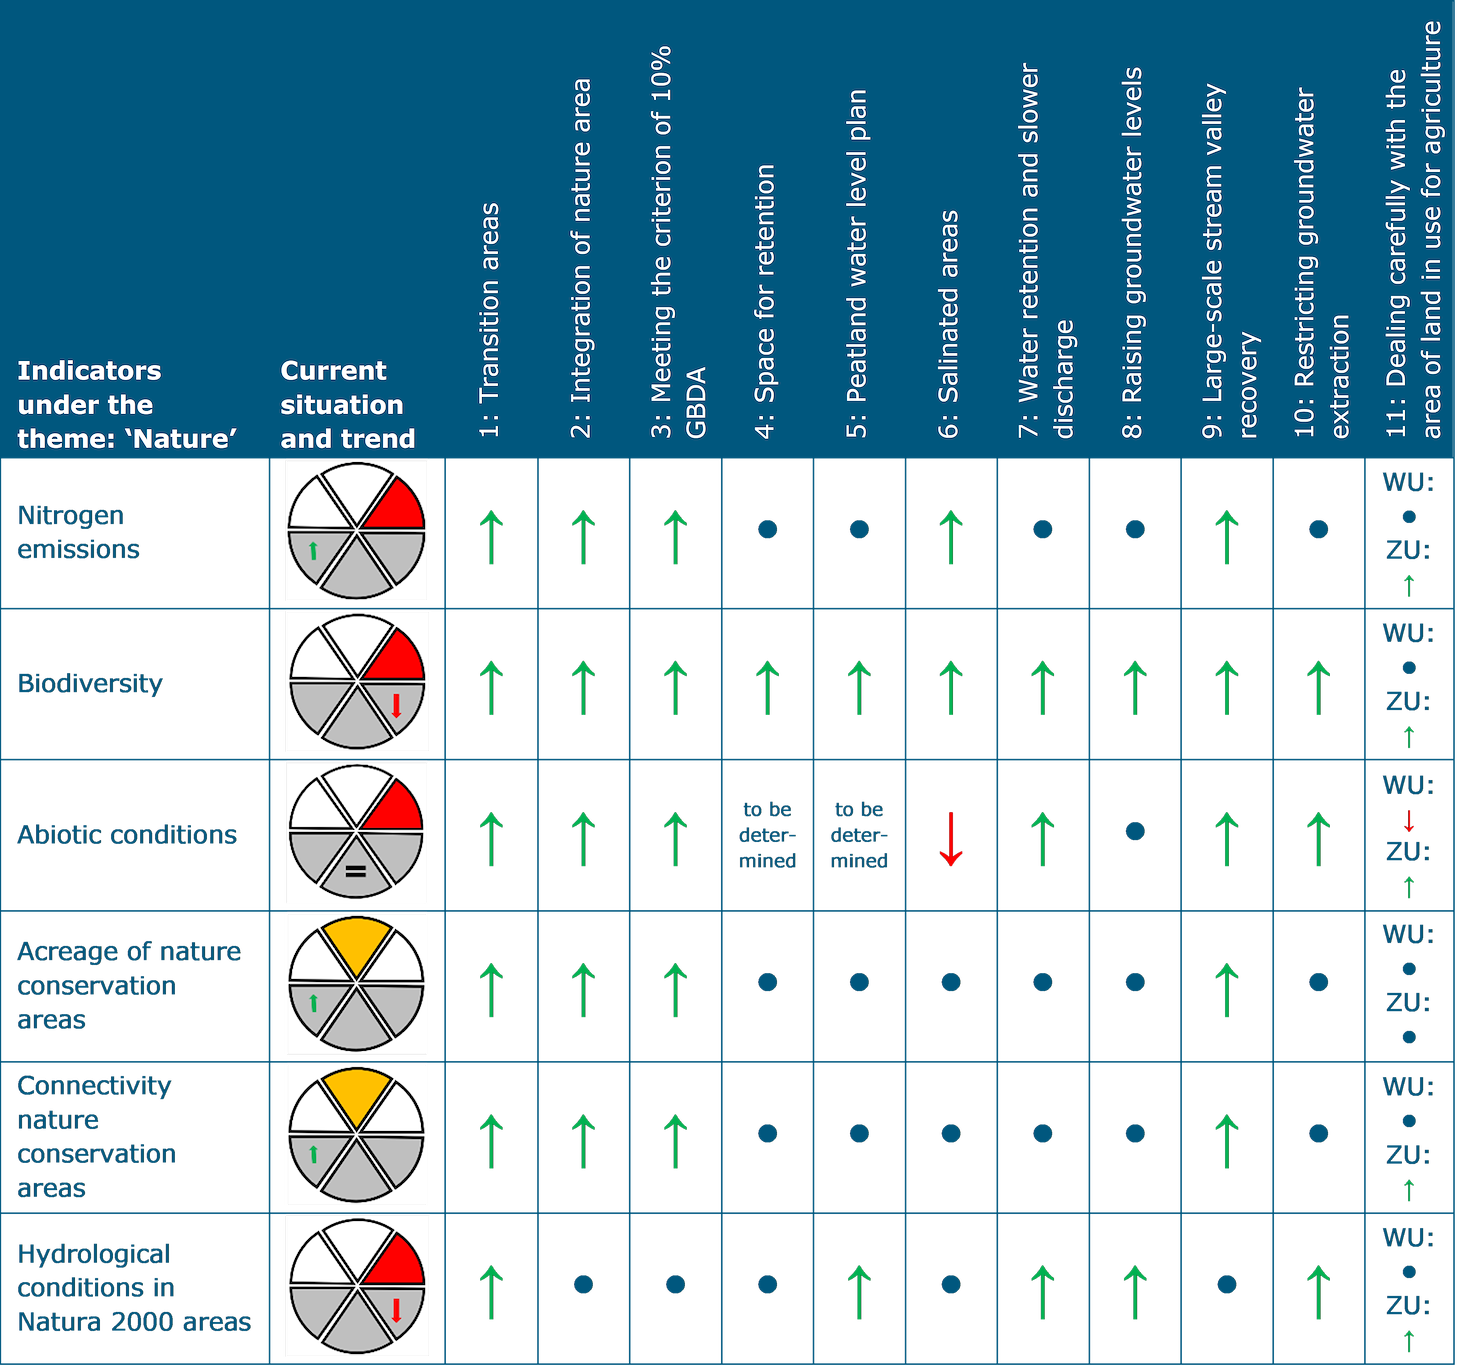 This table shows the assessment for the theme Nature. The indicator ‘Nitrogen emissions’ has a poor current situation but there is evidence of a positive trend. There is a probability of positive impact for structuring choices 1: Transition areas, 2: Integration of nature area, 3: Meeting the criterion of 10% green-blue networking, 6: Salinated areas, 9: Large-scale stream valley recovery and 11: Dealing carefully with the area of land in use for agriculture in areas with serious challenges. There are no or practically no consequences for the structuring choices 4: Space for retention, 5: Peatland water level plan, 7: Water retention and slower discharge, 8: Raising groundwater levels, 10: Restricting groundwater extraction and 11: Dealing carefully with the area of land in use for agriculture in areas with limited challenges. The indicator ‘Biodiversity’ has a poor current situation with a negative trend. There is a probability of positive impact for all structuring choices except choice 11: Dealing carefully with the area of land in use for agriculture in areas with limited challenges. Here there are no or practically no consequences.  The indicator ‘Abiotic conditions’ has a poor current situation and no evidence of a trend in respect of current status. There is a probability of positive impact for the structuring choices 1: Transition areas, 2: Integration of nature area, 3: Meeting the criterion of 10% green-blue networking, 7: Water retention and slower discharge, 9: Large-scale stream valley recovery, 10: Restricting groundwater extraction and 11: Dealing carefully with the area of land in use for agriculture in areas with serious challenges. There is a probability of negative impact for the structuring choices 6: Salinated areas and 11: Dealing carefully with the area of land in use for agriculture in areas with limited challenges. Structuring choices 4, Space for retention and 5: Peatland water level plan, cannot be assessed.  The indicator ‘Acreage of nature conservation areas’ has a current situation of reasonable status with a positive trend. There is a probability of positive impact for the structuring choices 1: Transition areas, 2: Integration of nature area, 3: Meeting the criterion of 10% green-blue networking and 9: Acreage of nature conservation areas. For the other choices there are no or practically no consequences.  The indicator ‘Connectivity of nature conservation areas’ has a current situation of moderate status with a positive trend. There is a probability of positive impact for the structuring choices 1: Transition areas, 2: Integration of nature area, 3: Meeting the criterion of 10% green-blue networking, 9: Acreage of nature conservation areas and 11: Dealing carefully with the area of land in use for agriculture in areas with serious challenges. For the other choices there are no or practically no consequences.  The indicator ‘Hydrological conditions in Natura 2000 areas’ has a poor current situation with a negative trend. There is a probability of positive impact for the structuring choices 1: Transition areas, 5: Peatland water level plan, 7: Water retention and slower discharge, 8: Raising groundwater levels, 10: Large-scale stream valley recovery and 11: Dealing carefully with the area of land in use for agriculture in areas with serious challenges. For the other structuring choices there are no or practically no consequences.